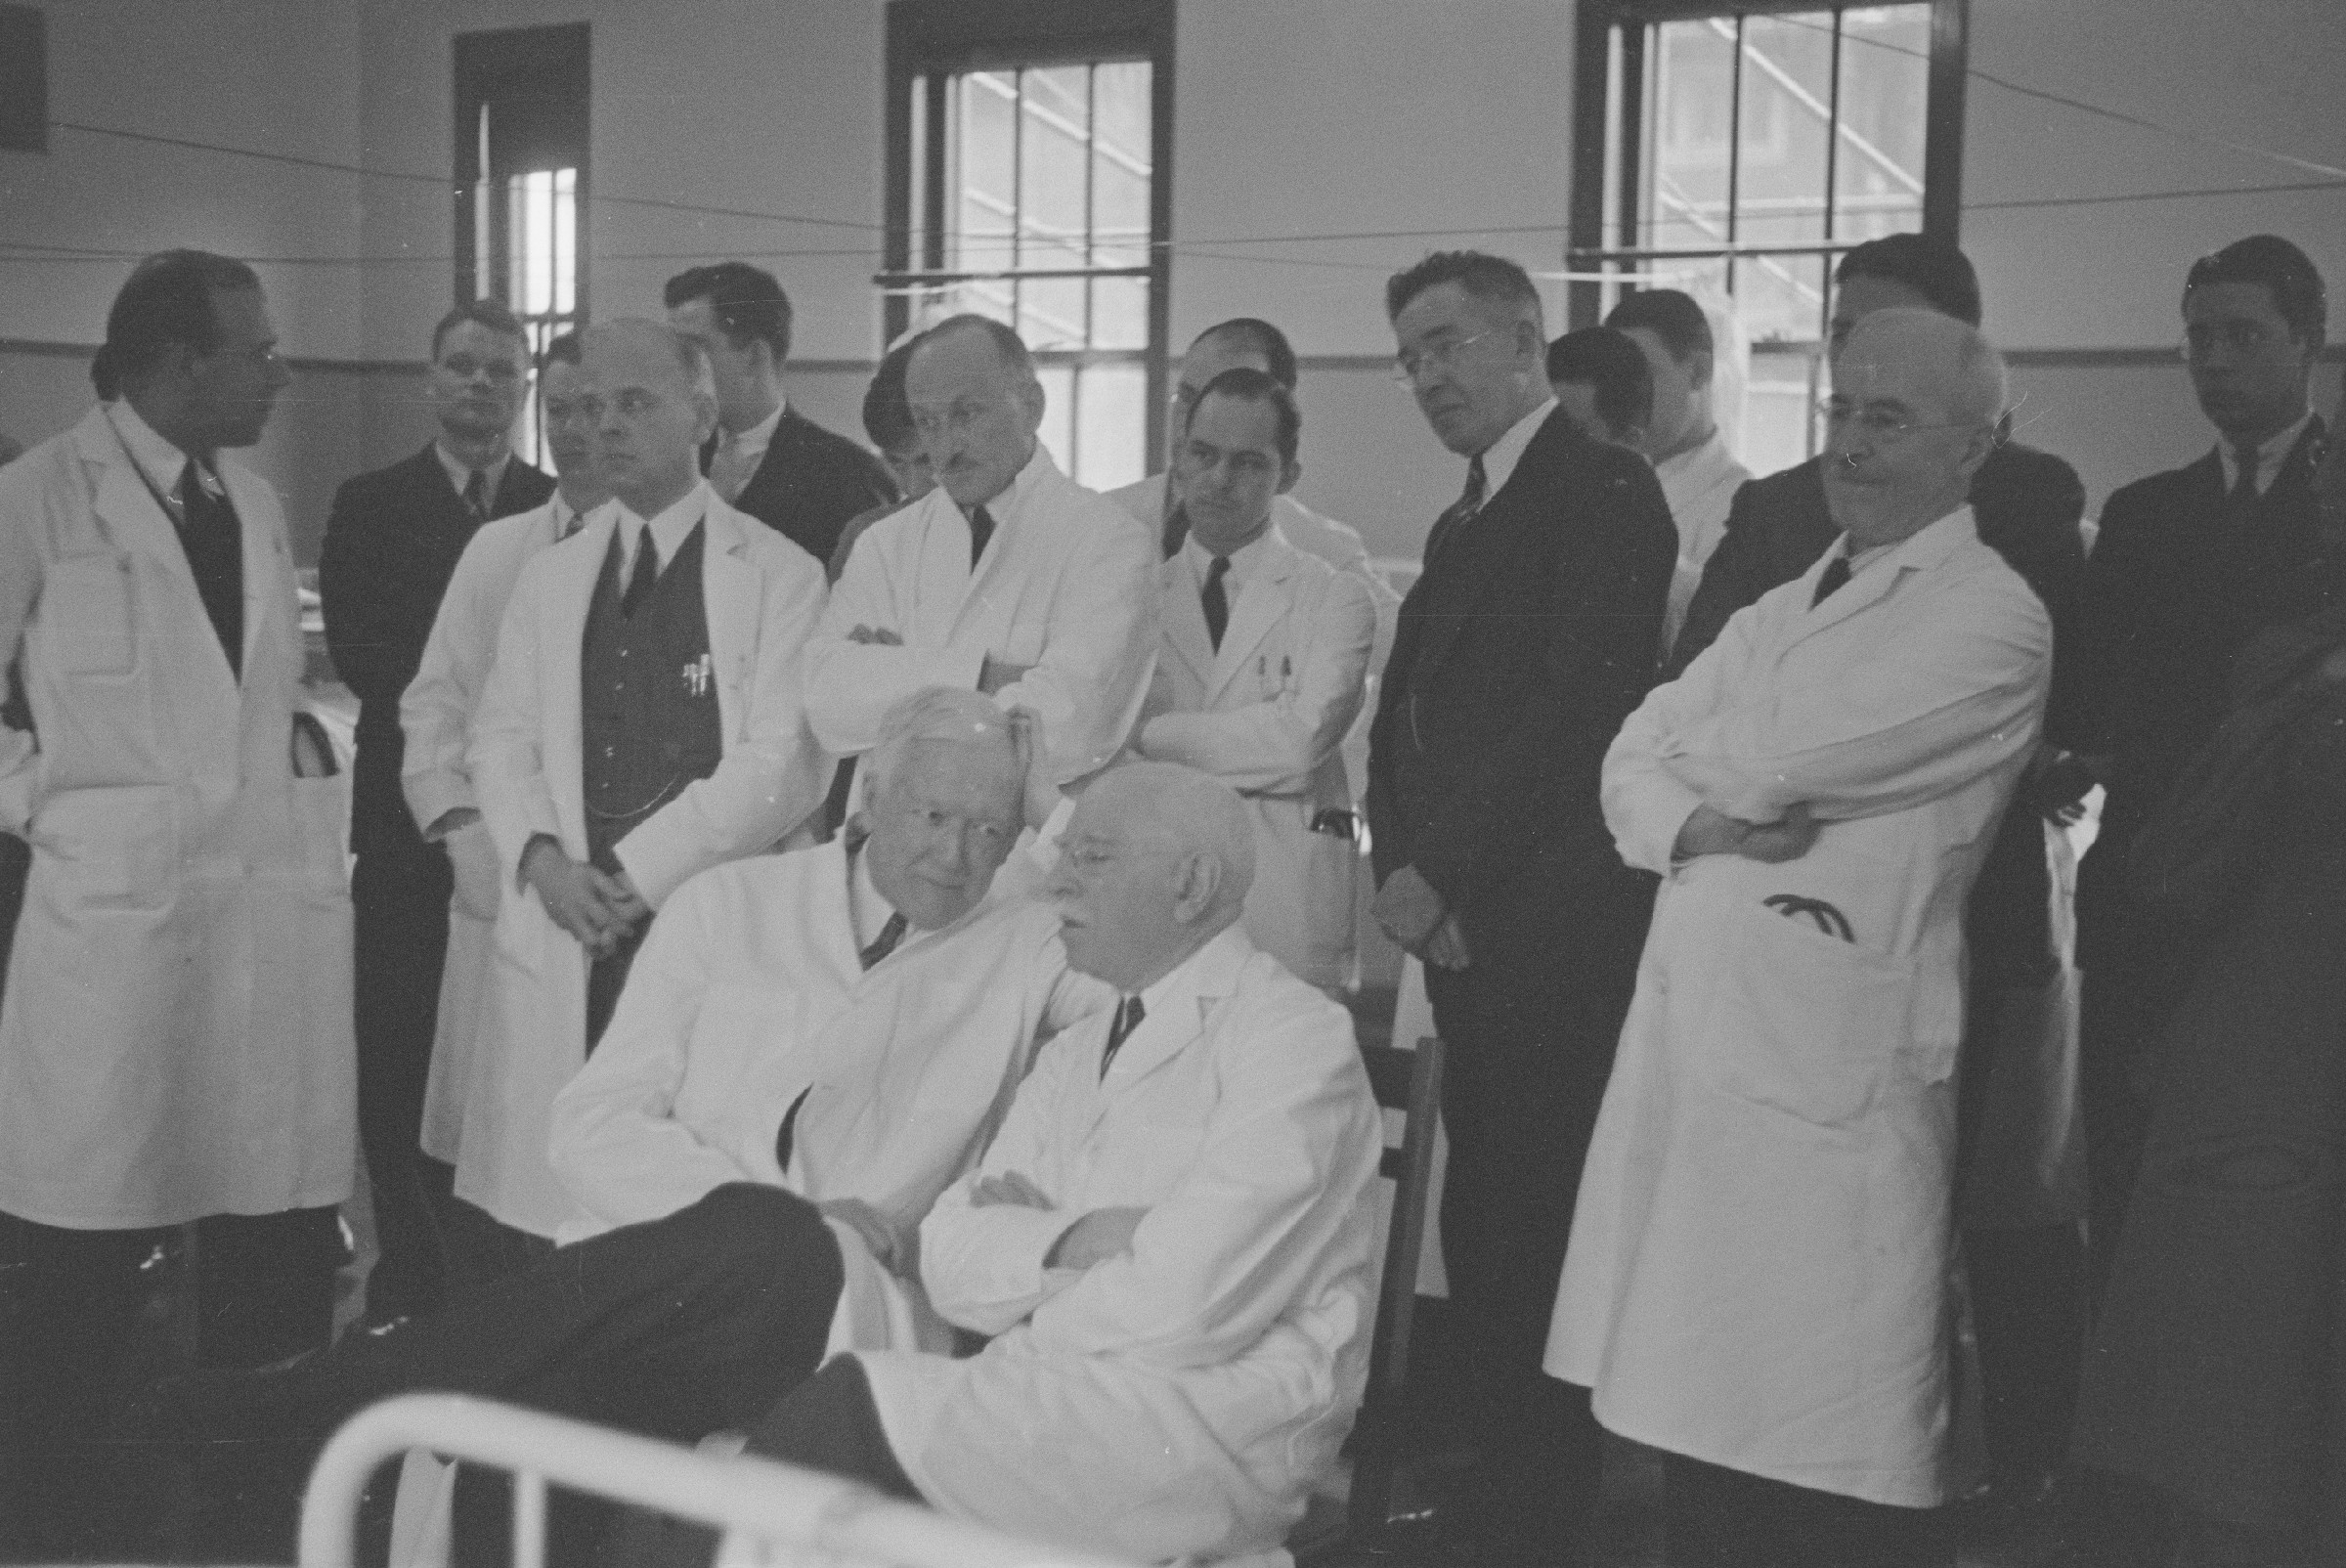 Group of doctors in suits or white coats sitting and standing around the end of a patient's bed in a hospital ward.